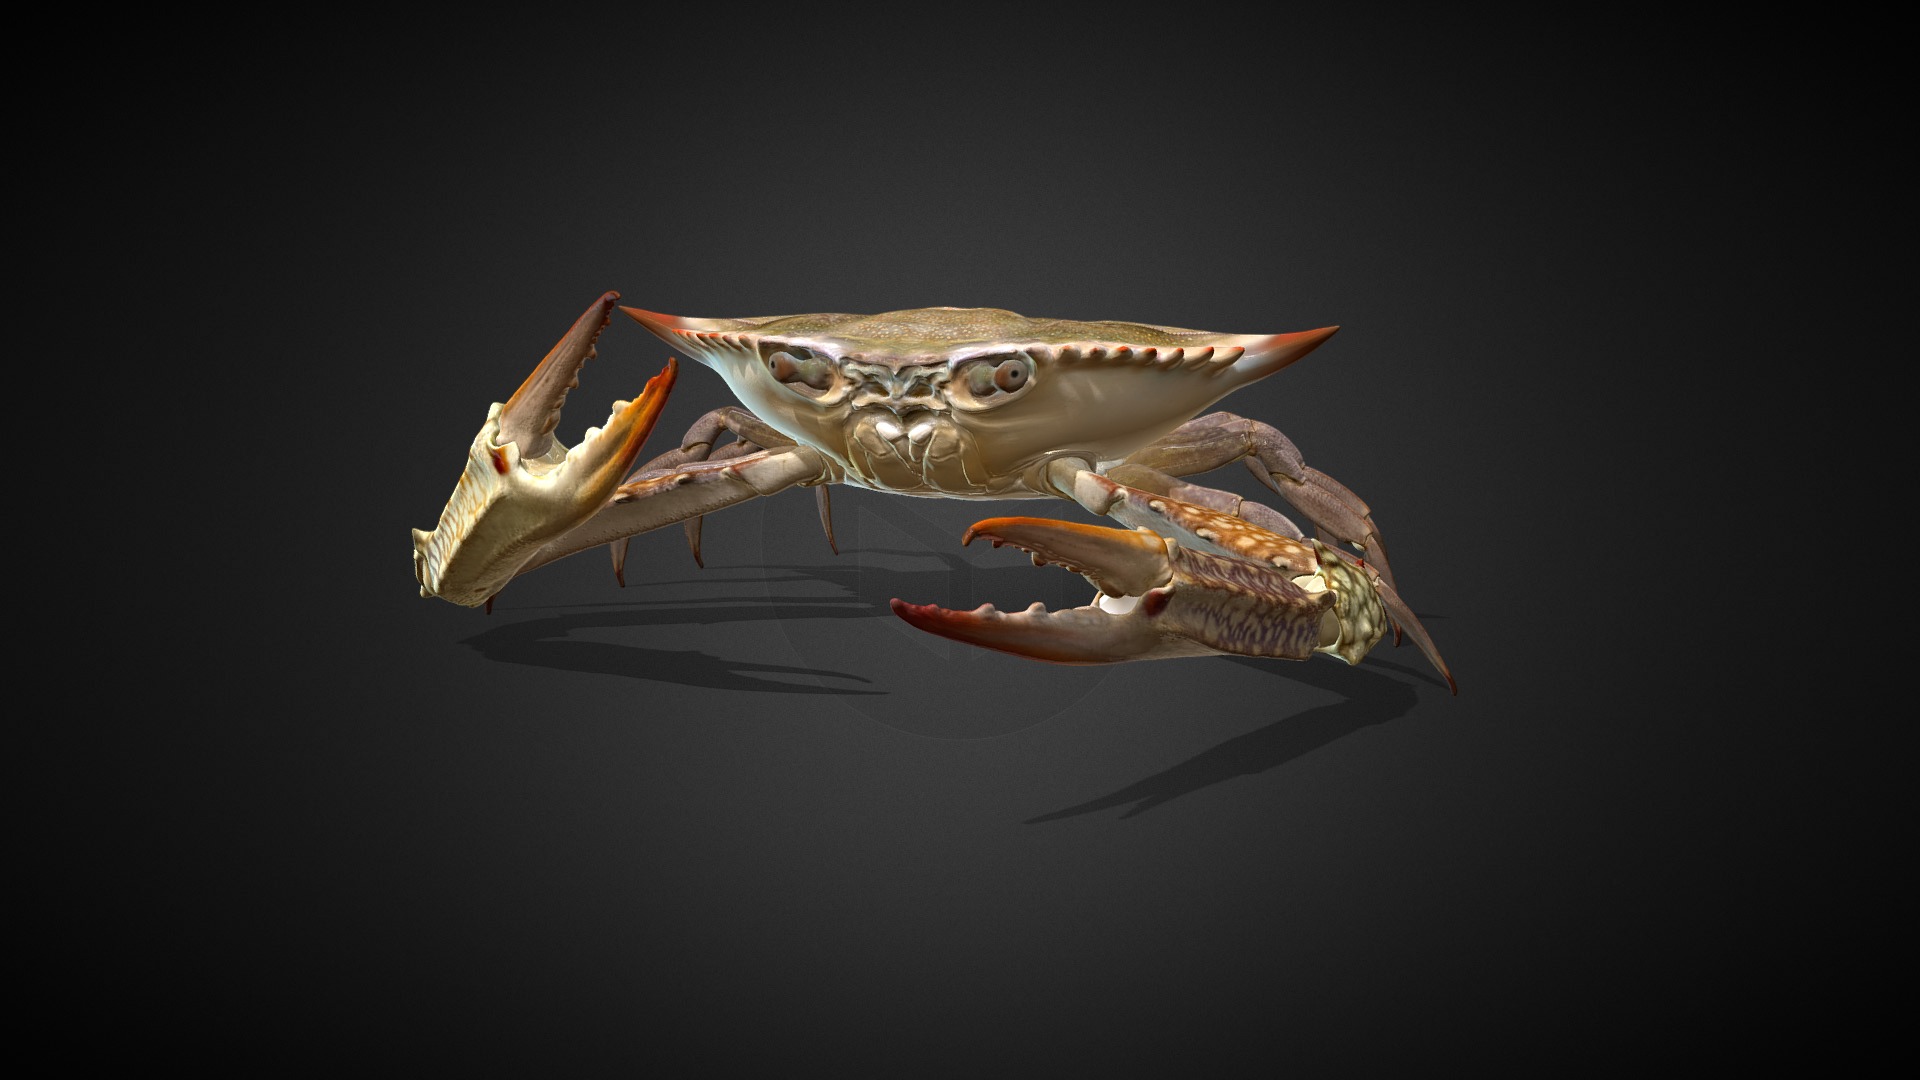 3D model The Crab - This is a 3D model of the The Crab. The 3D model is about a group of frogs.